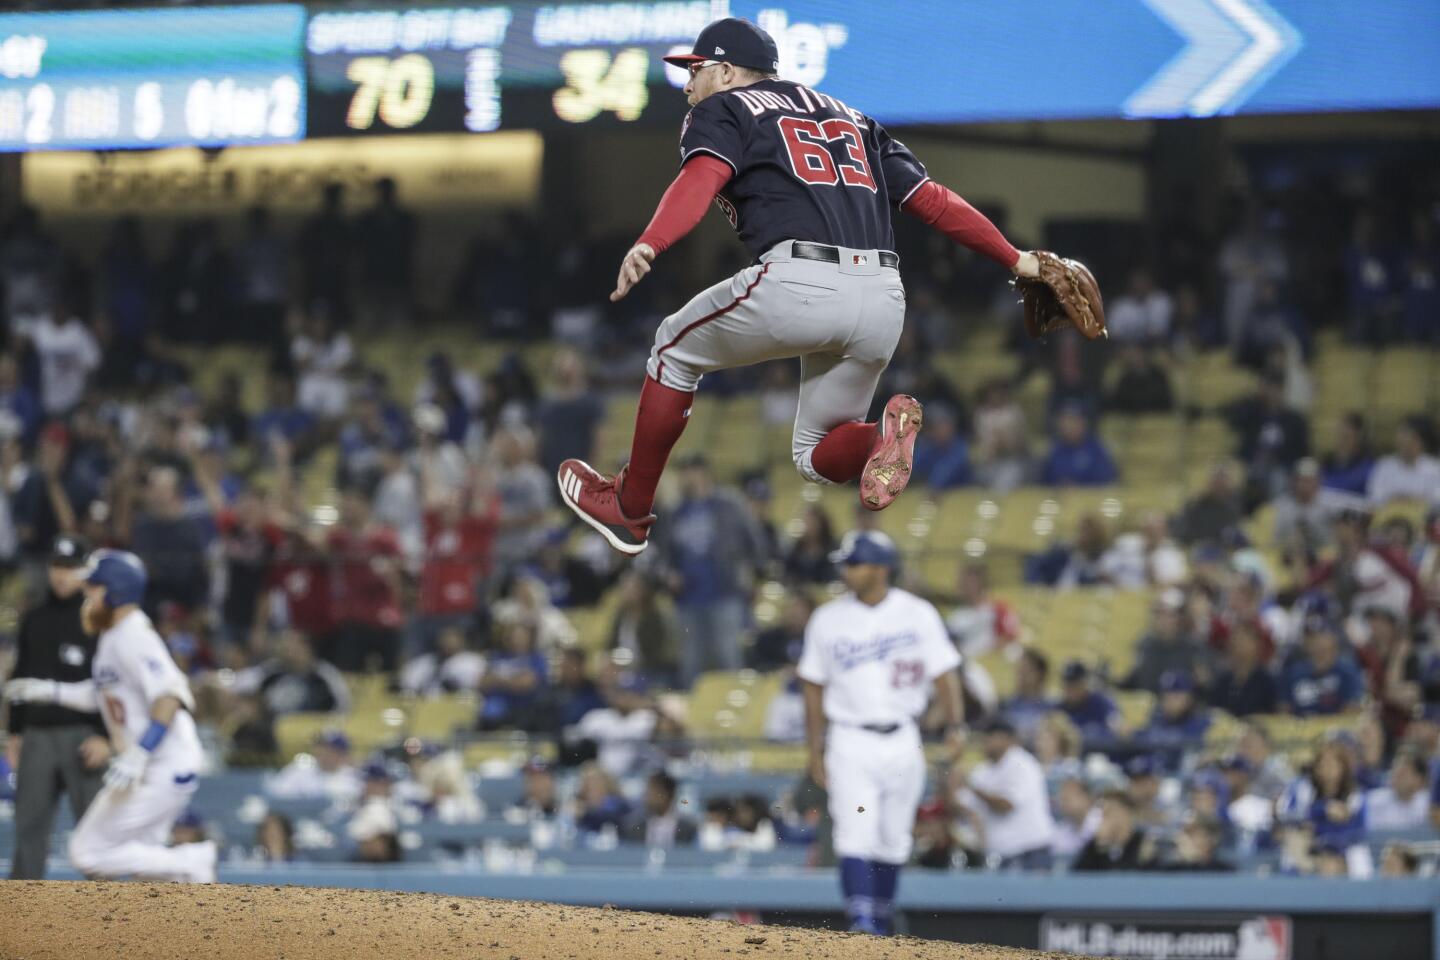 Nationals relief pitcher Sean Doolittle leaps for joy as Dodger third baseman Justin Turner flies out to end the game.